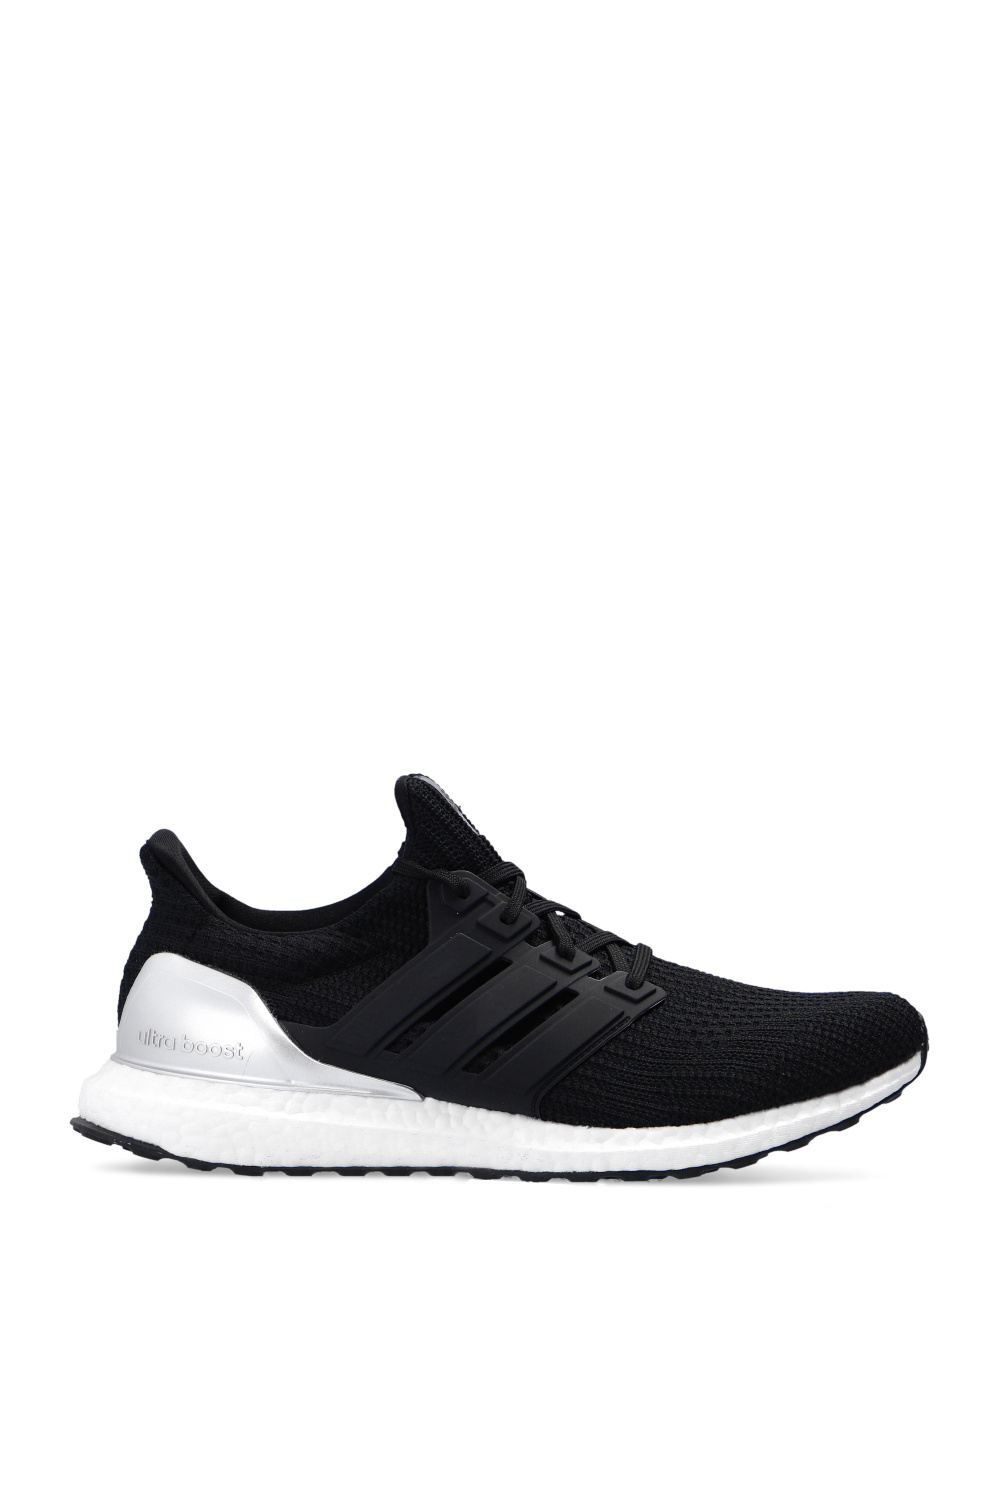 cp9541 adidas cleats for women shoes size - IetpShops - 'Ultraboost 4.0 DNA' sneakers ADIDAS